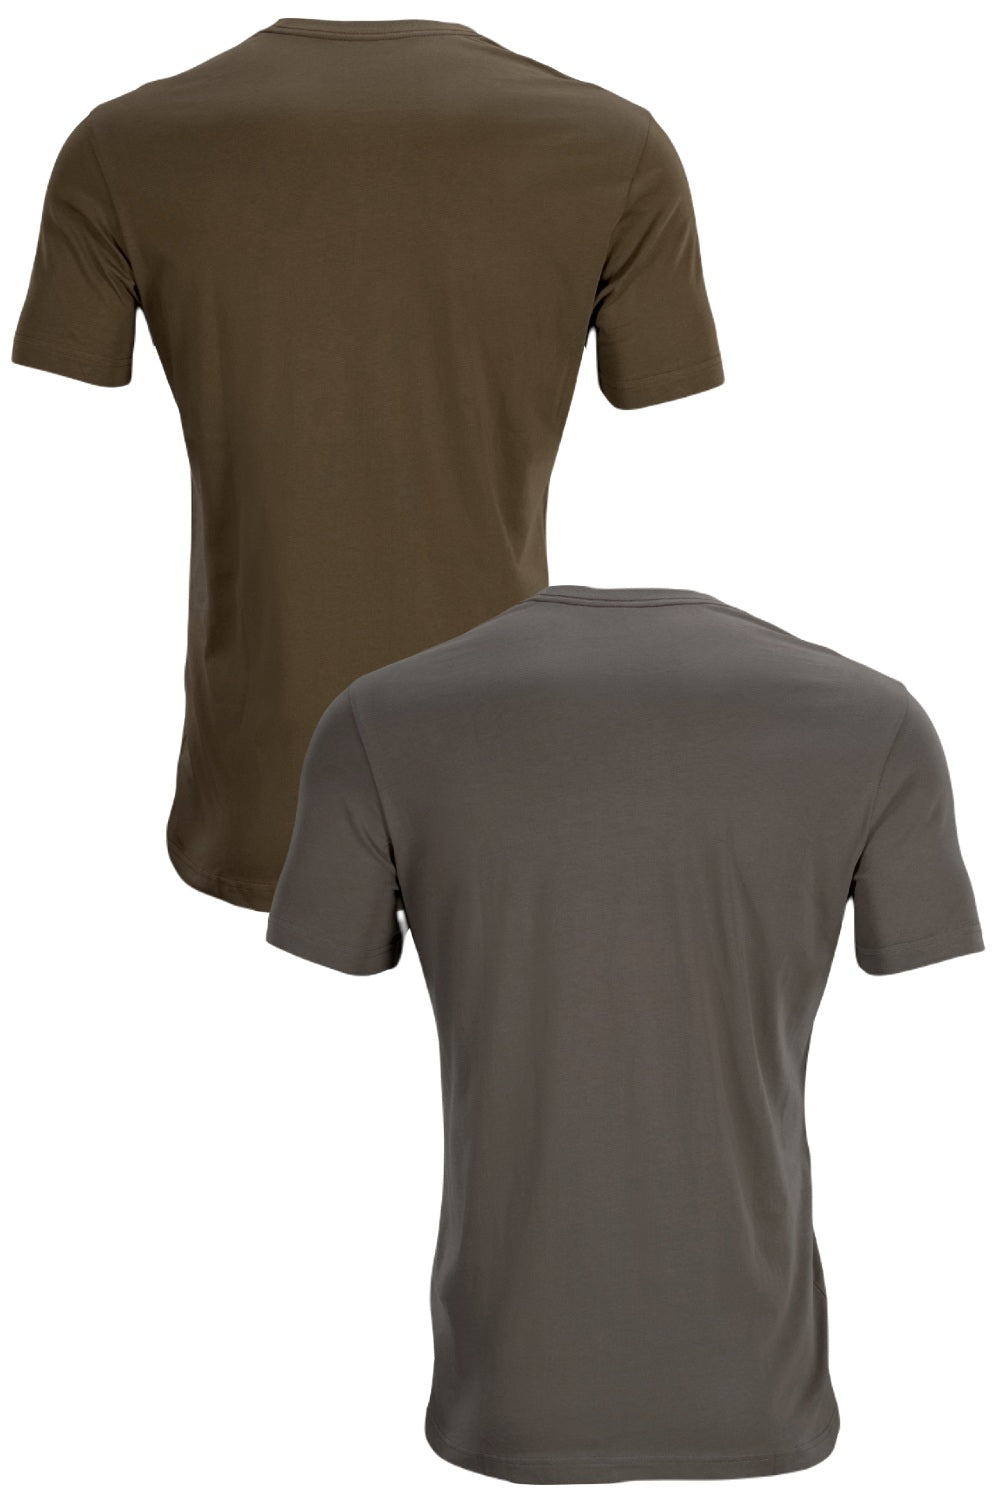 Harkila Graphic T-shirt 2-pack in Grey, Willow Green 